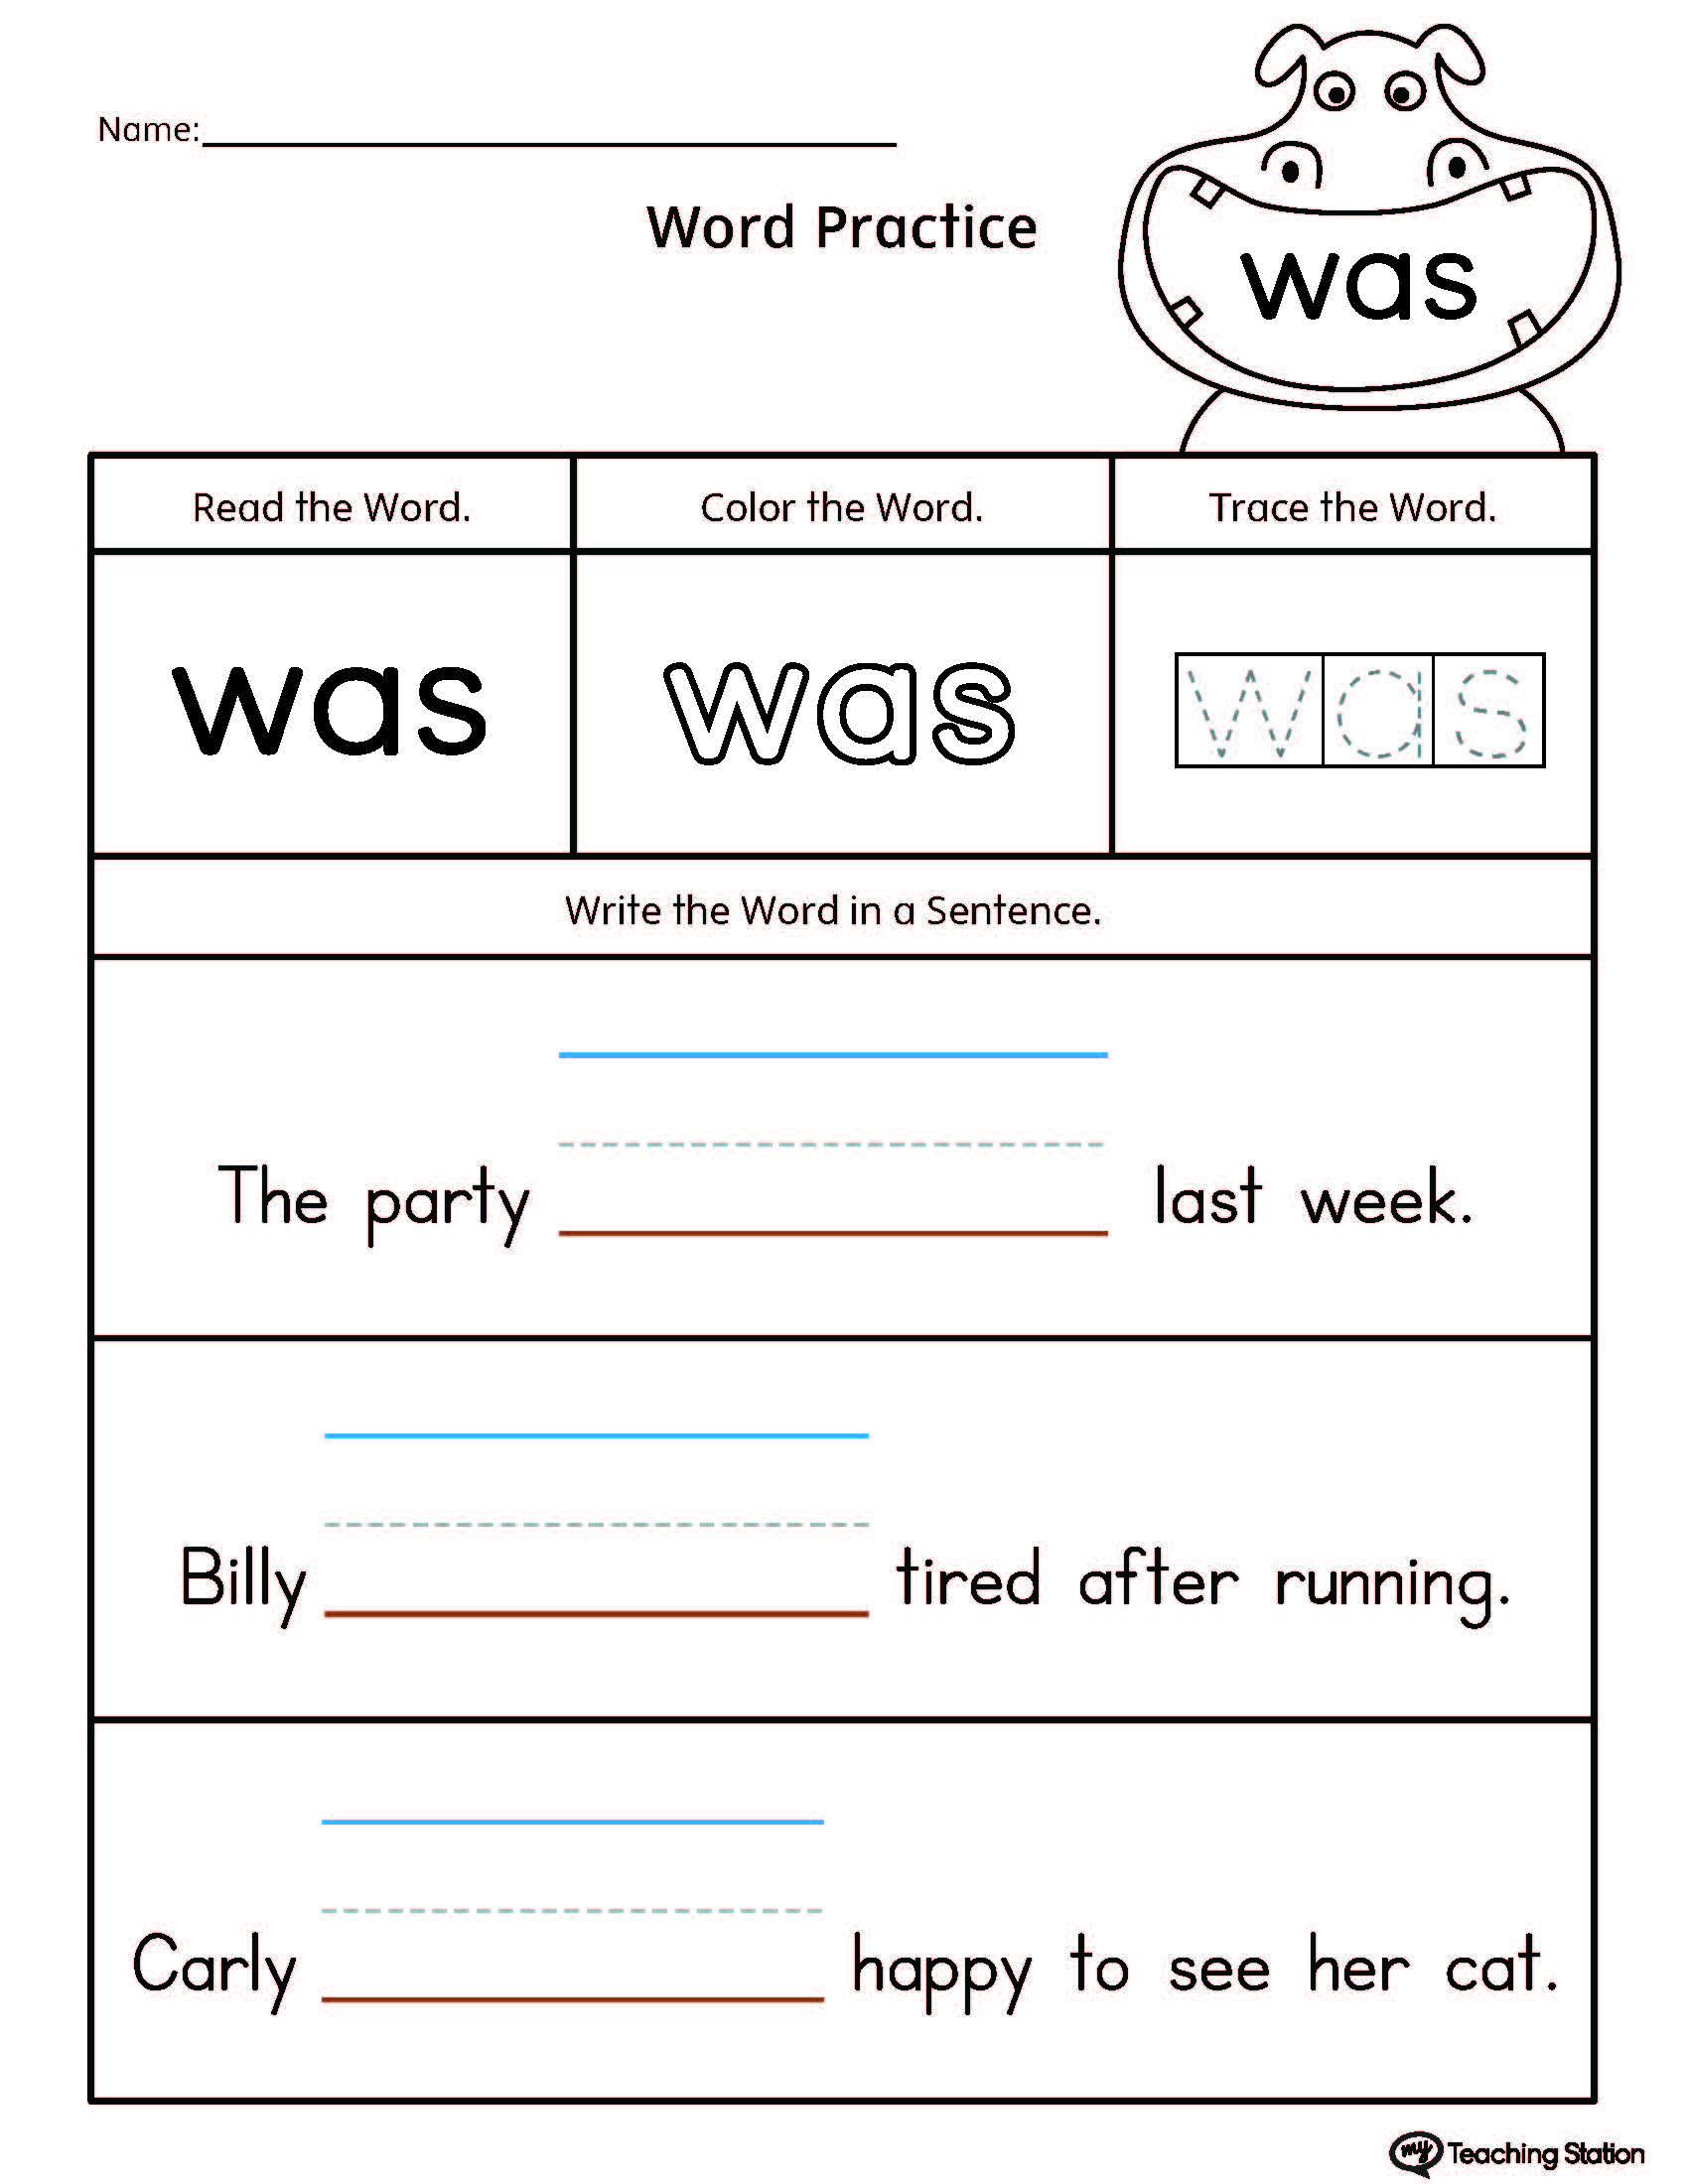 Build Sentences Using Sight Word: WAS